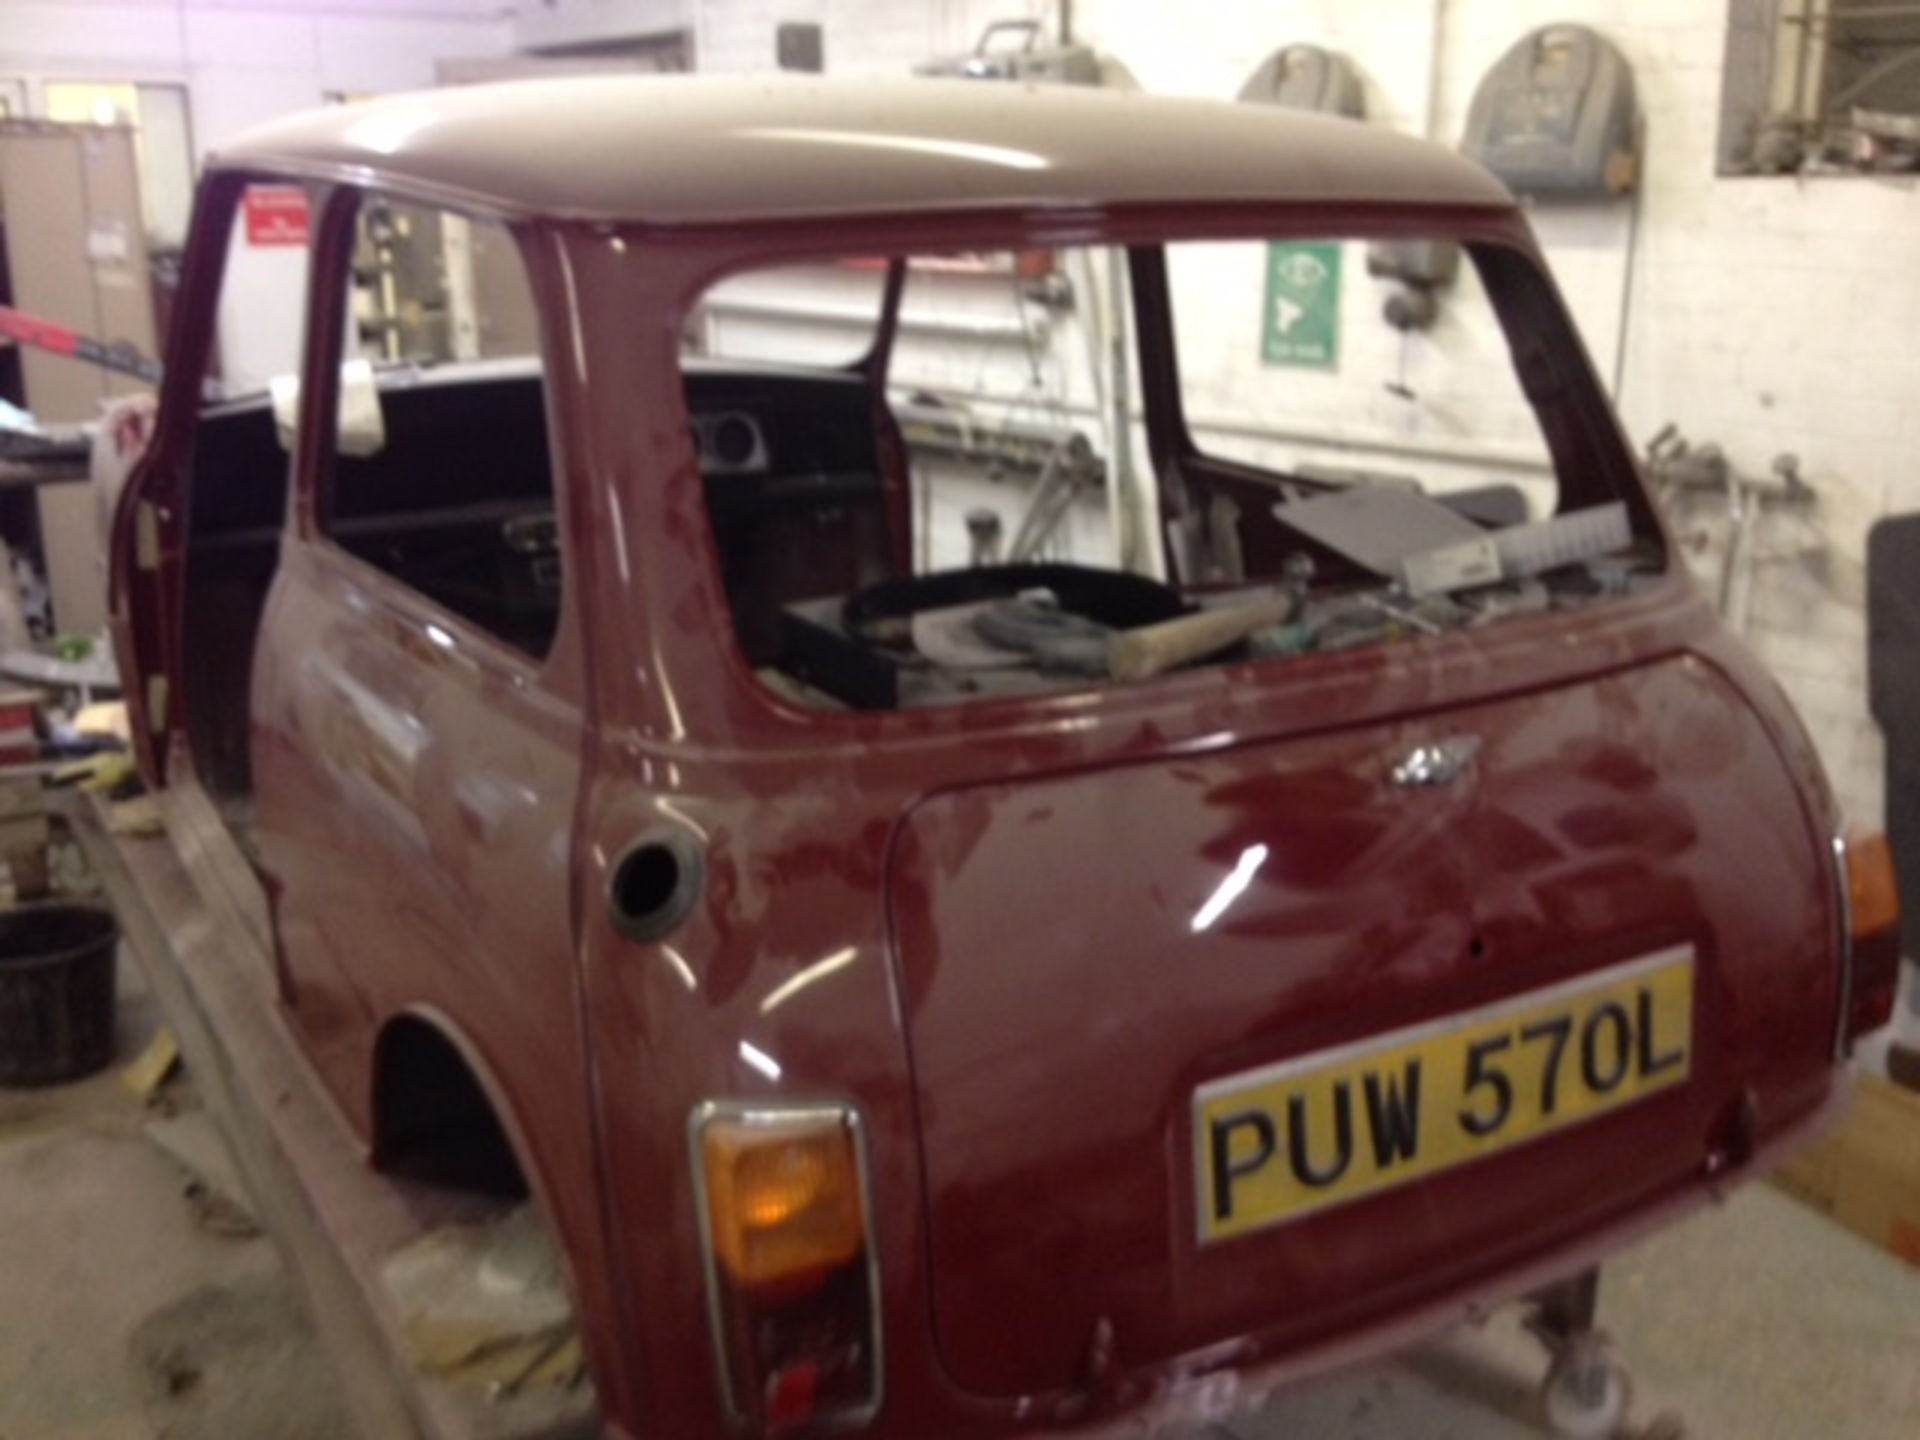 Fully Restored 1973 Mini Clubman - Image 16 of 25